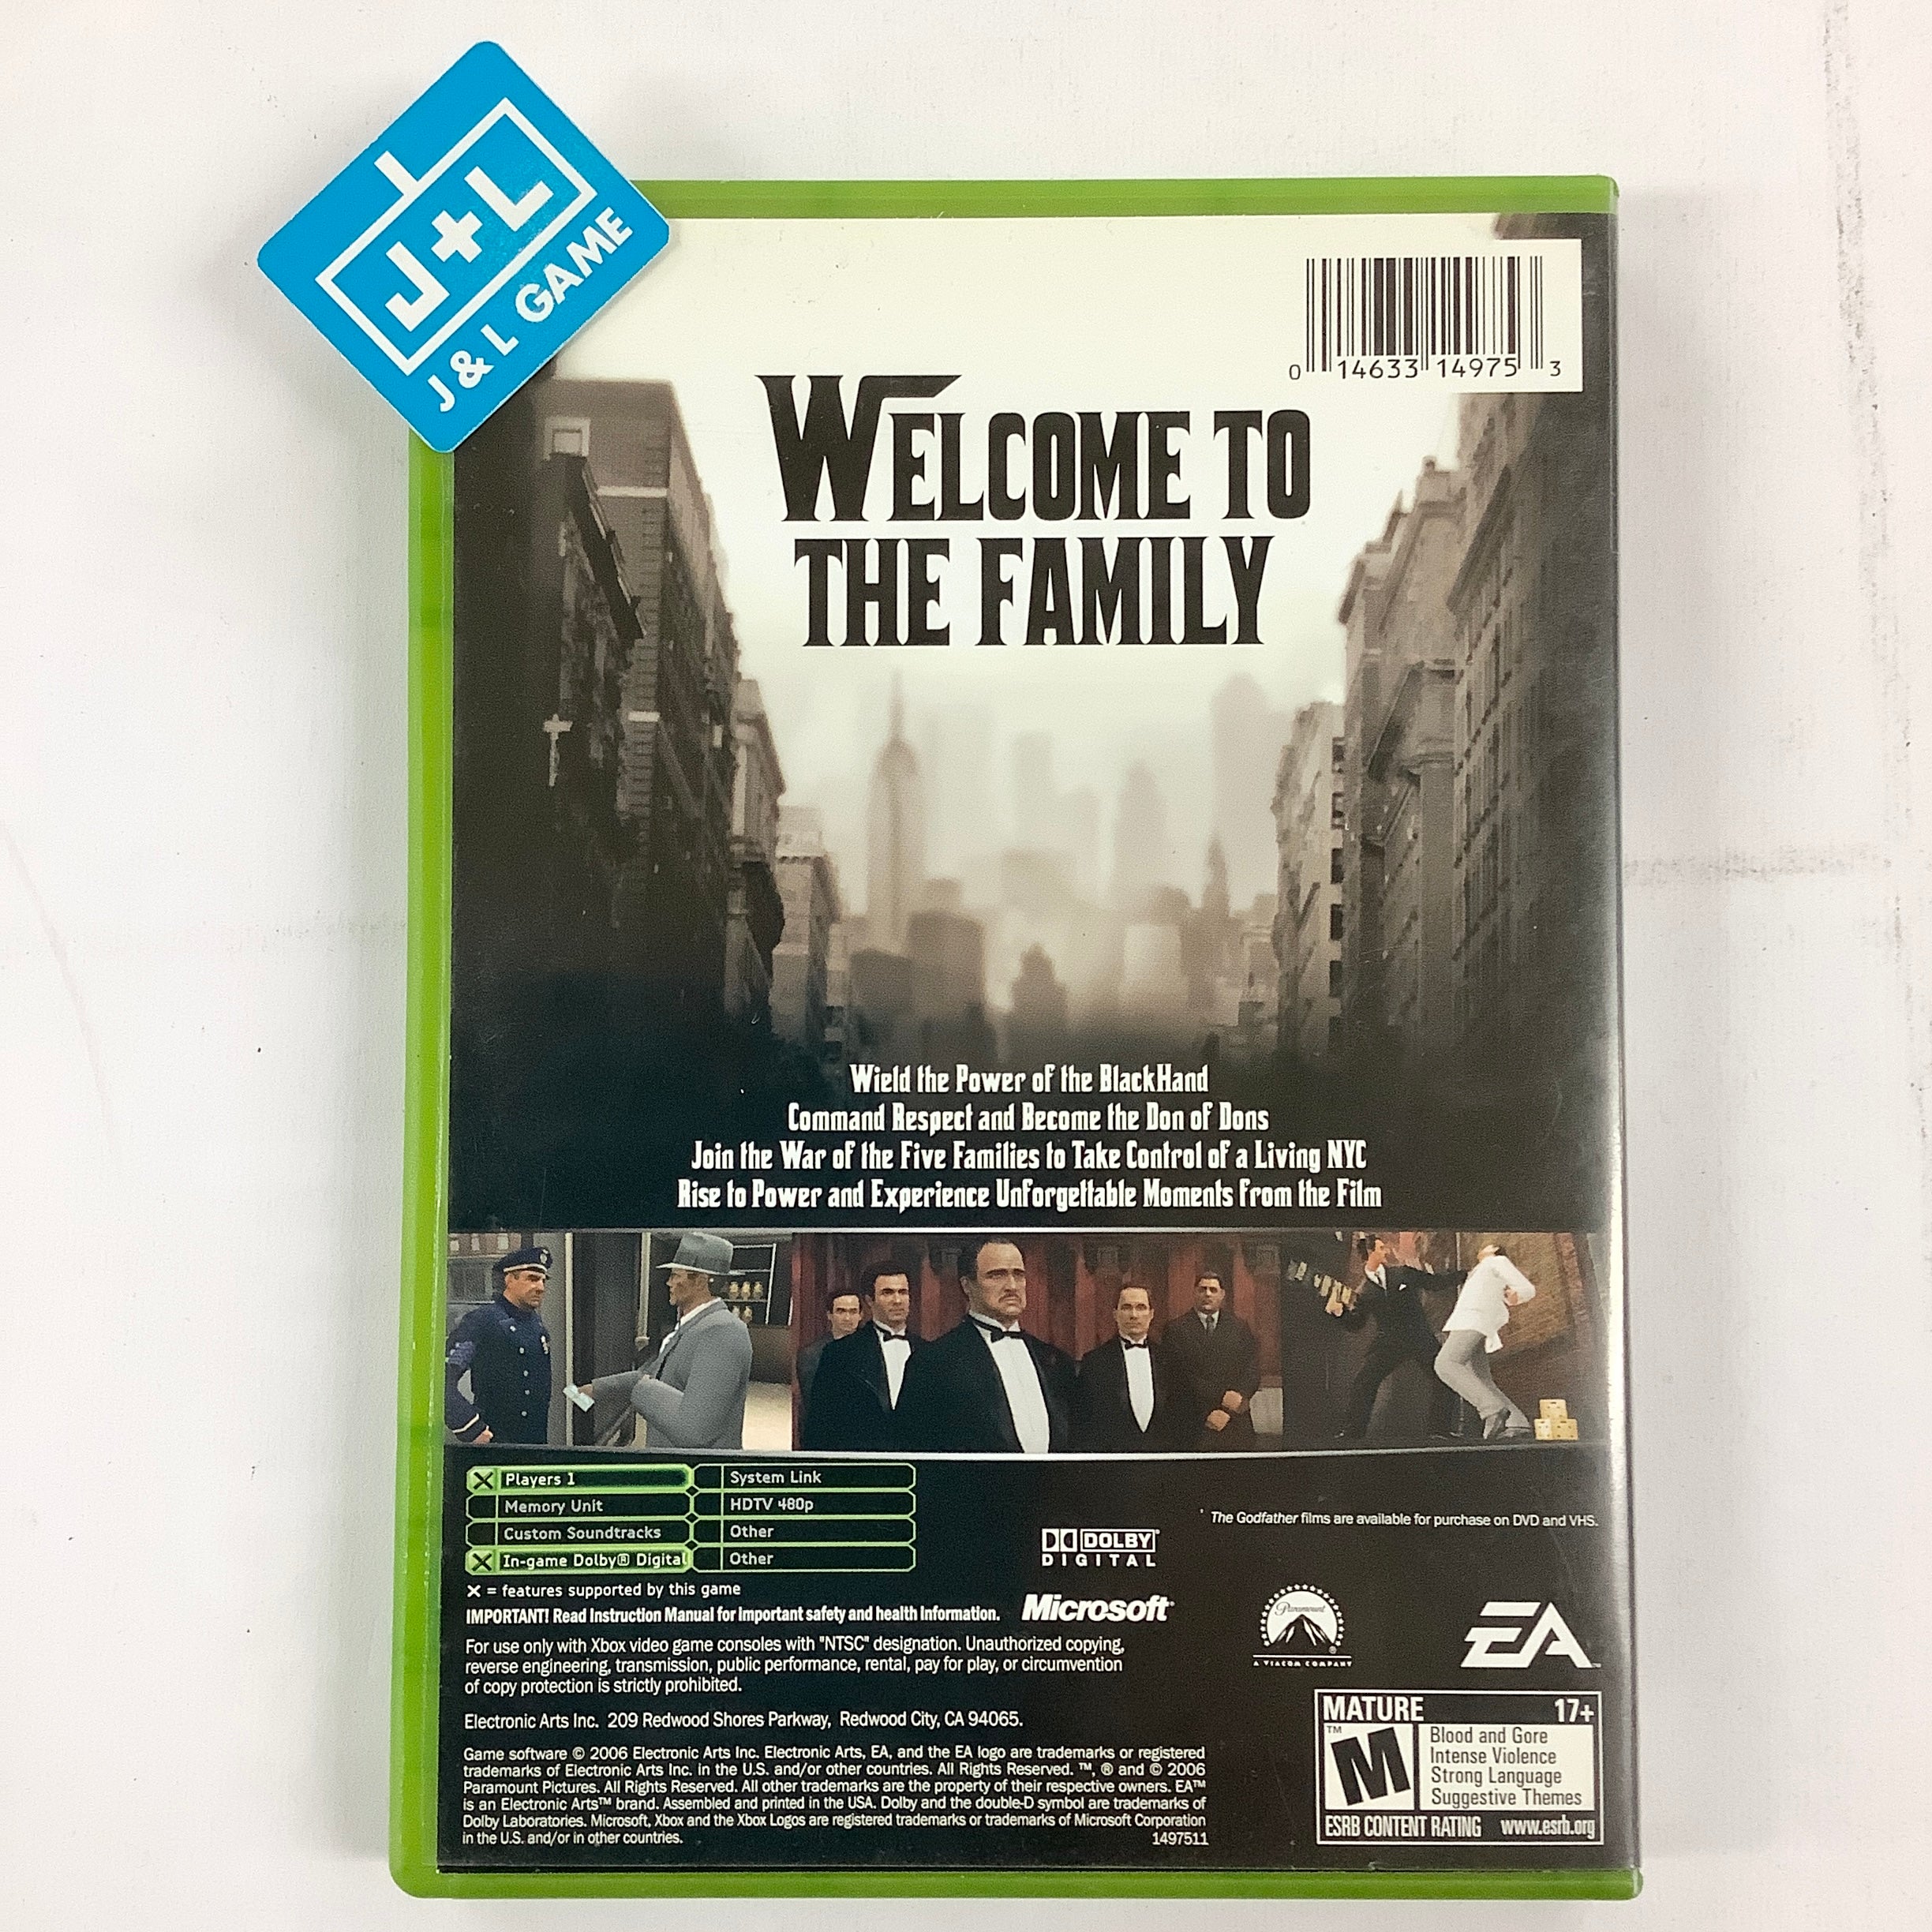 The Godfather - (XB) Xbox [Pre-Owned] Video Games Electronic Arts   